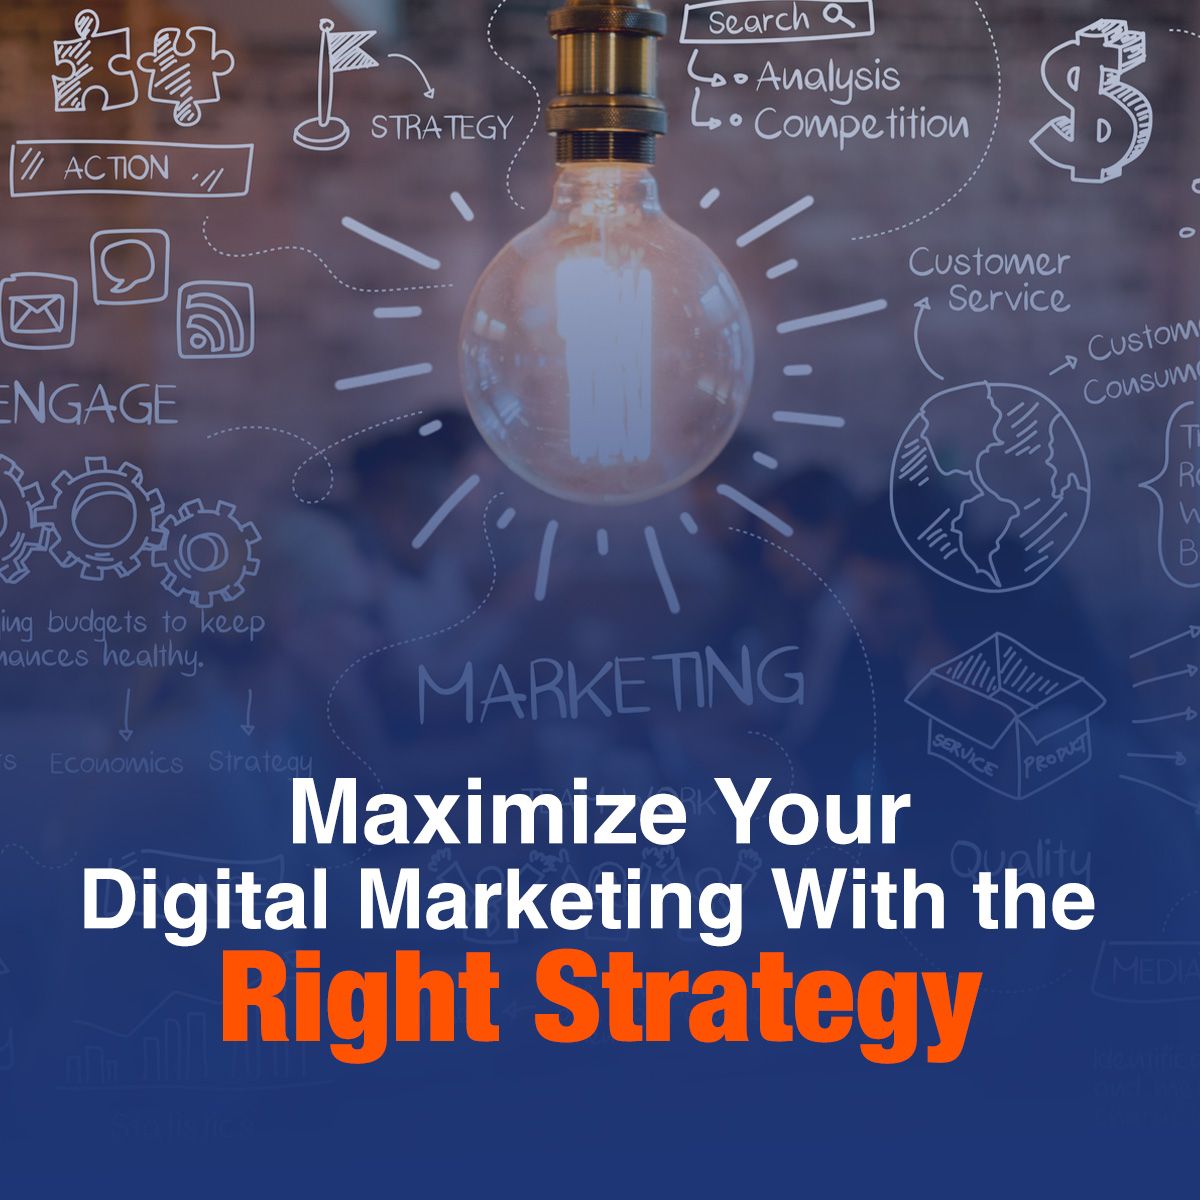 Maximize Your Digital Marketing With the Right Strategy